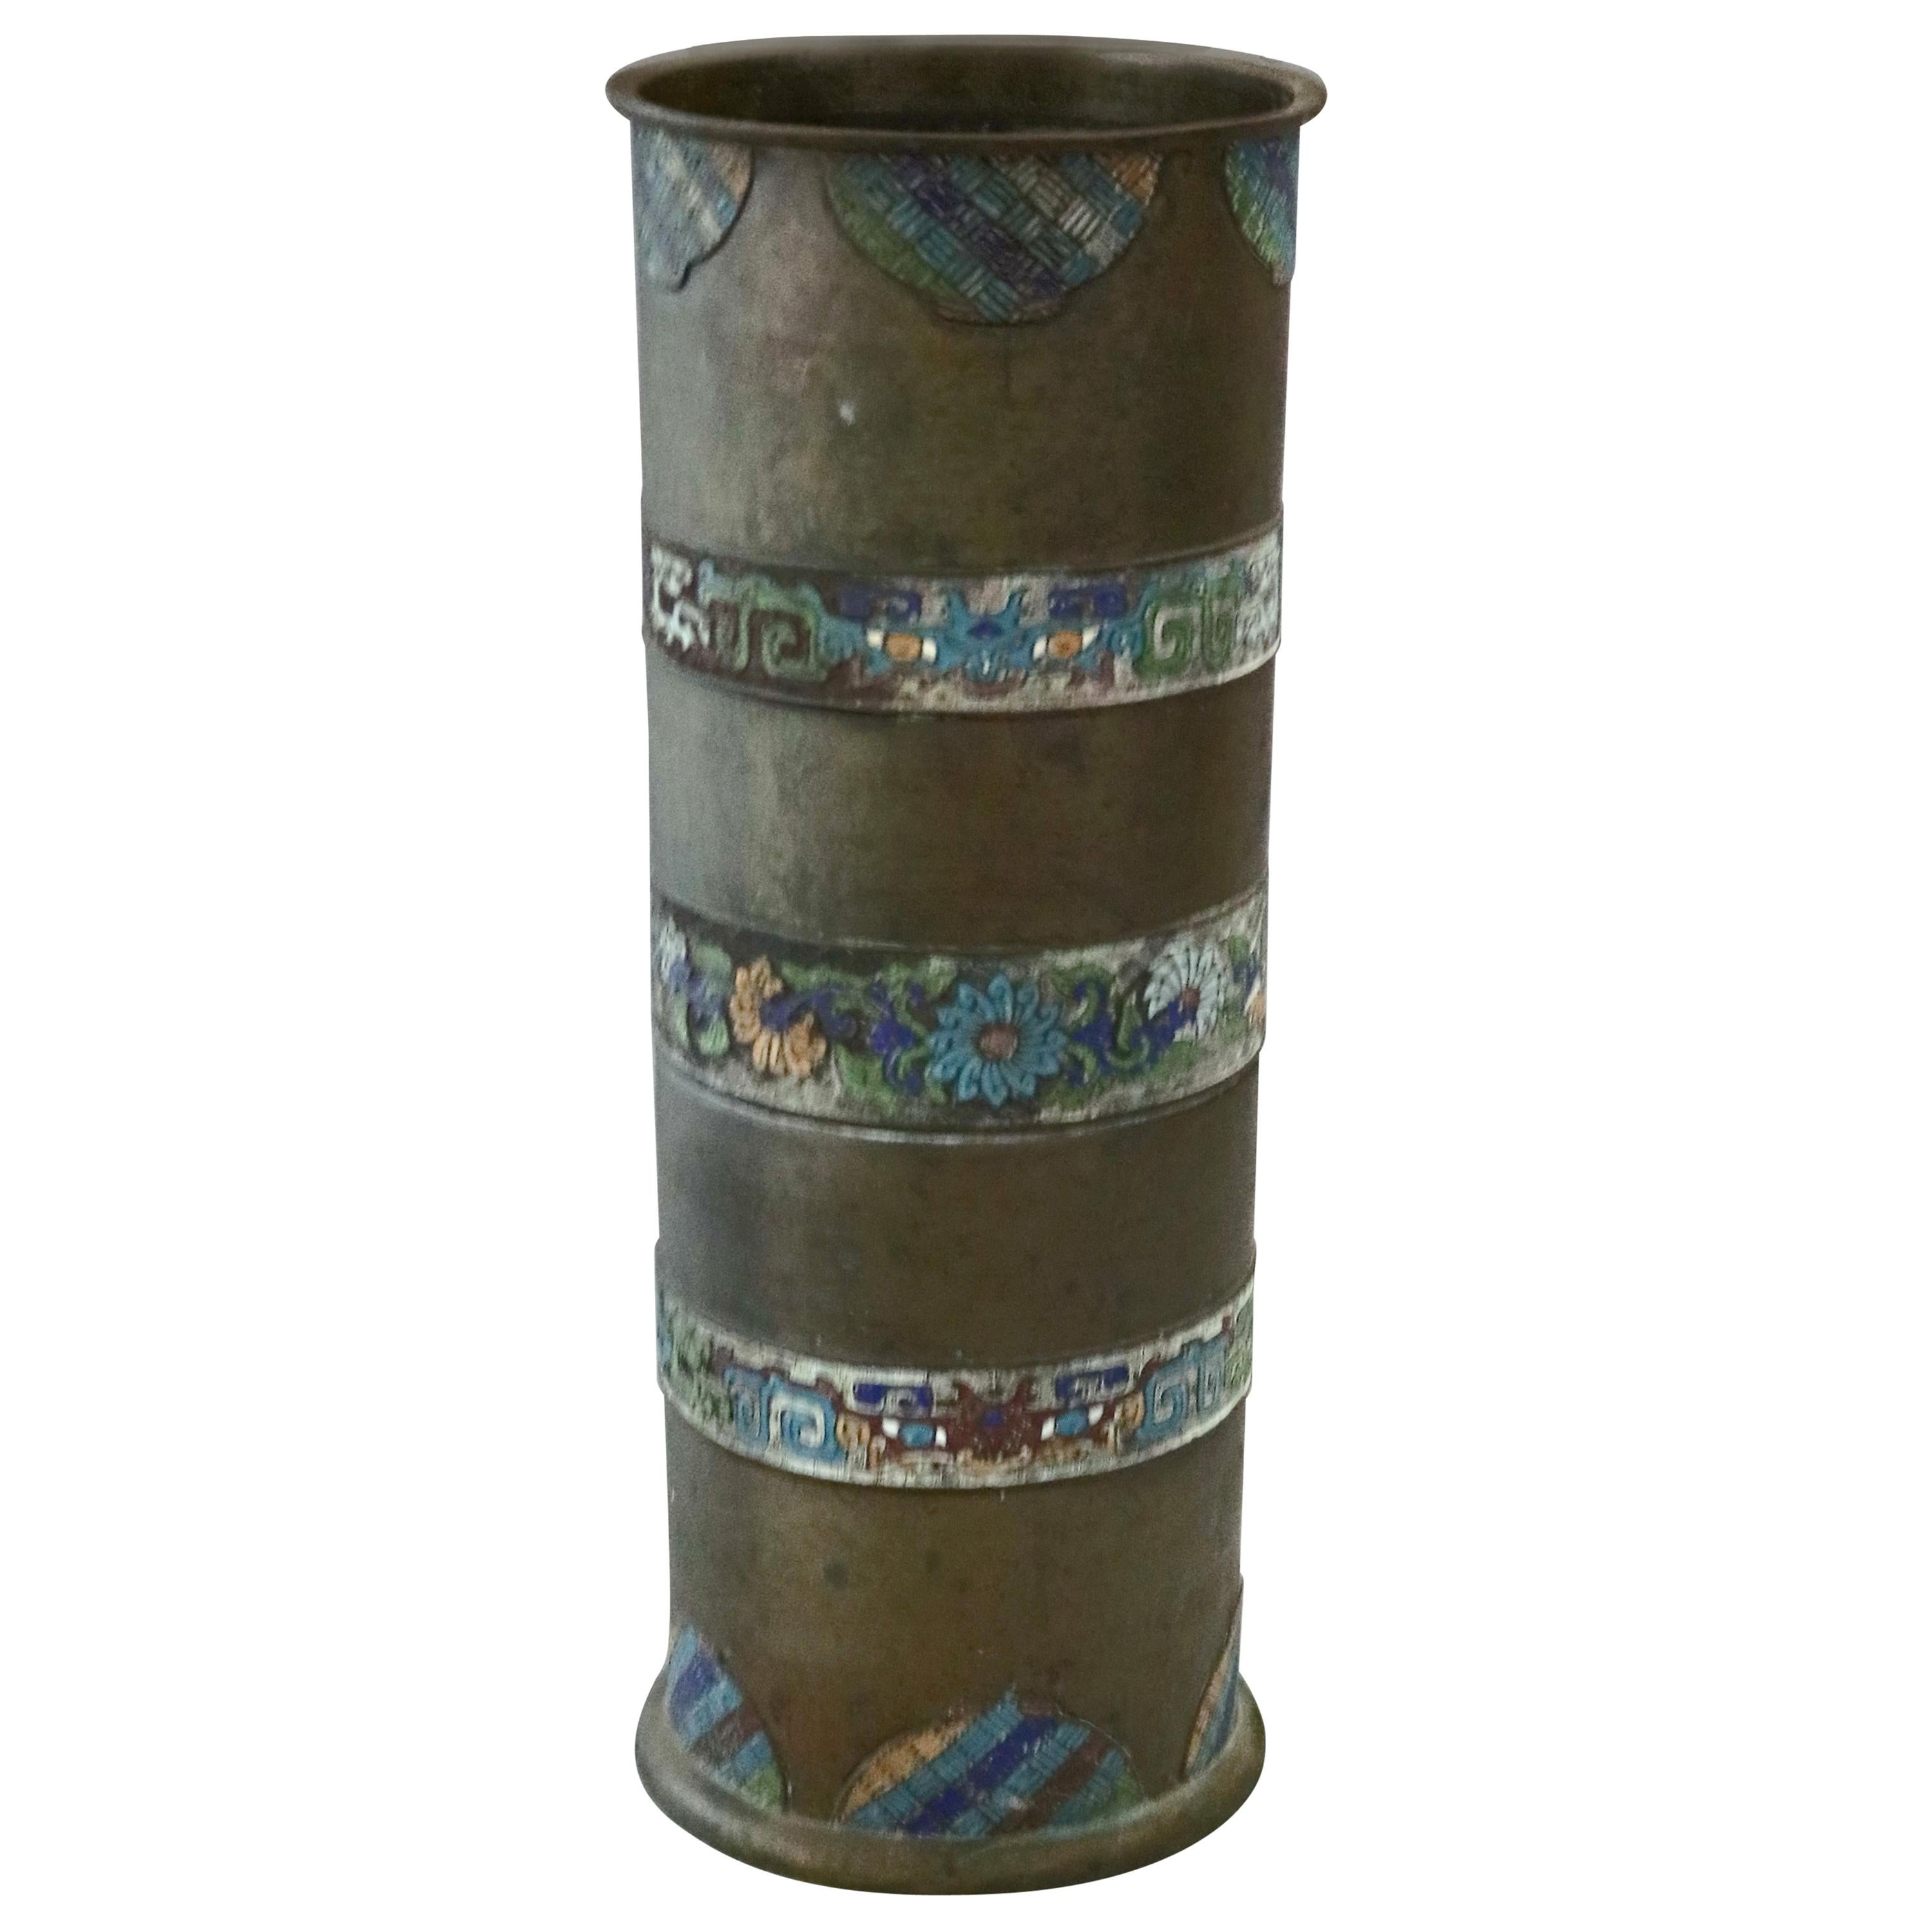 Antique Chinese Cloisonné Hand Enameled Bronze Umbrella Stand, 19th Century